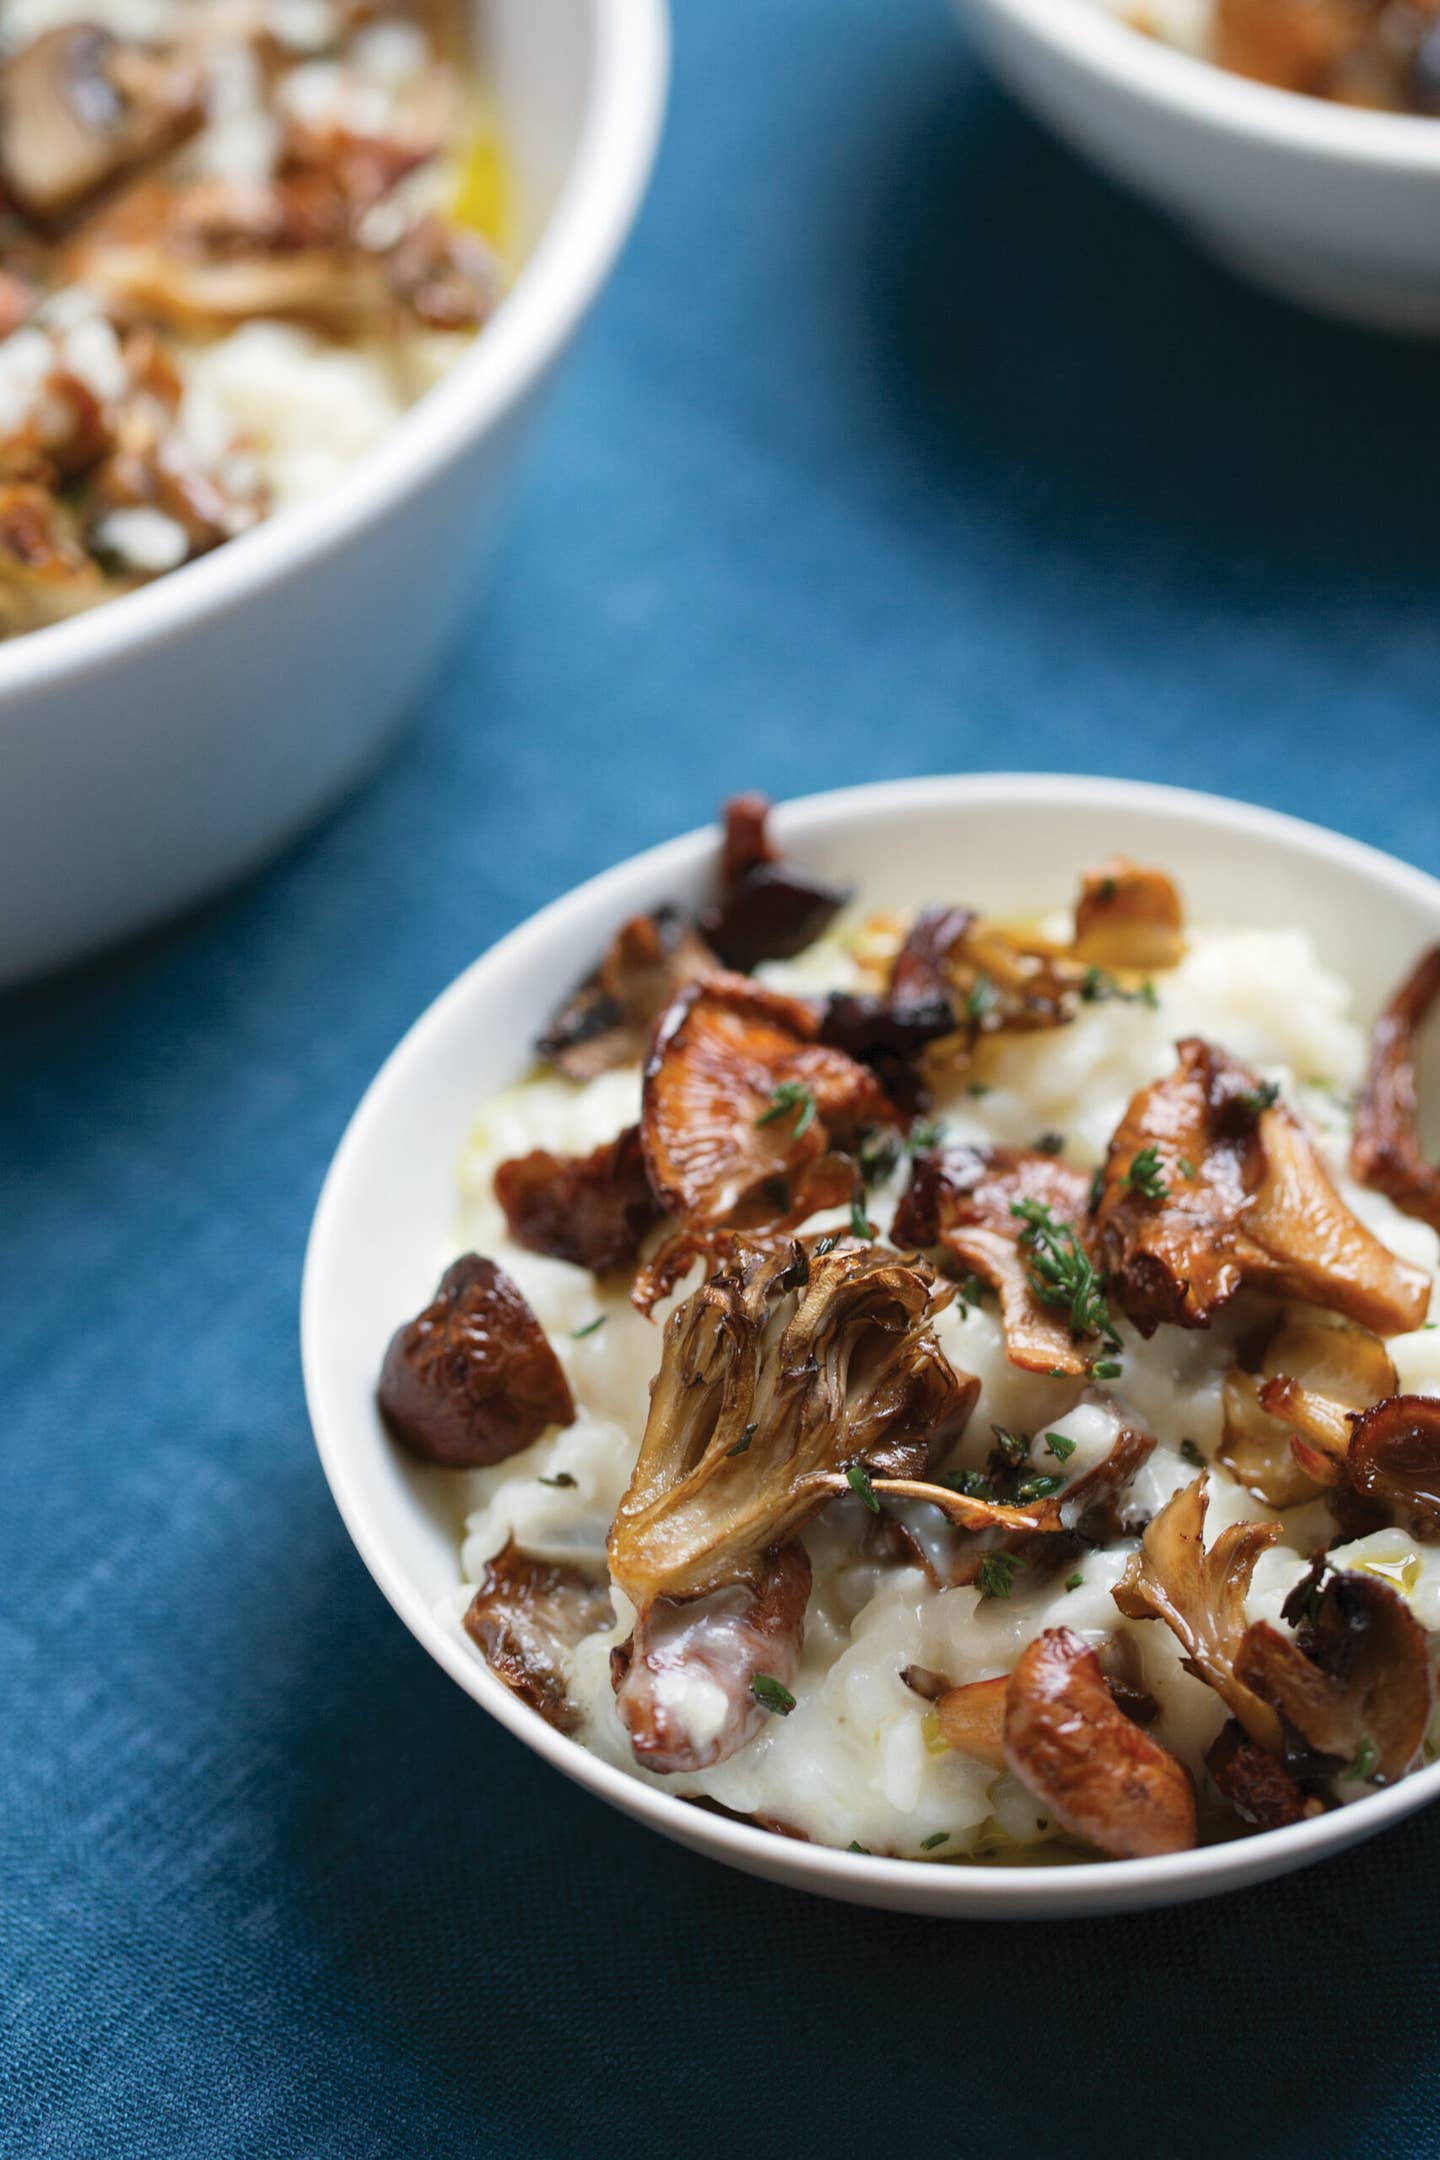 Yes, You Can Make This Mushroom Risotto on a Weeknight